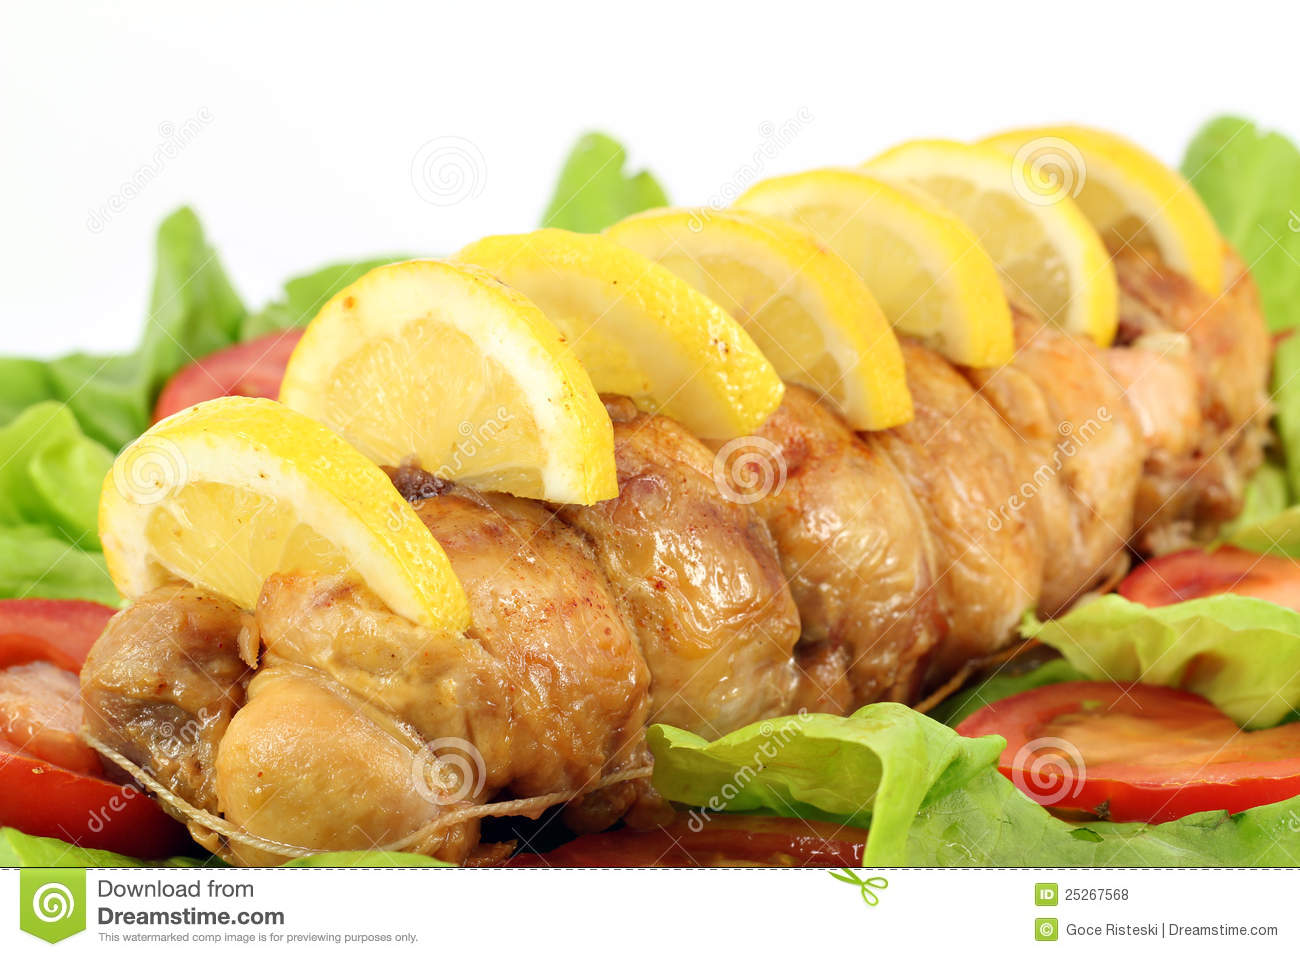 Chicken Meat Royalty Free Stock Photos   Image  25267568